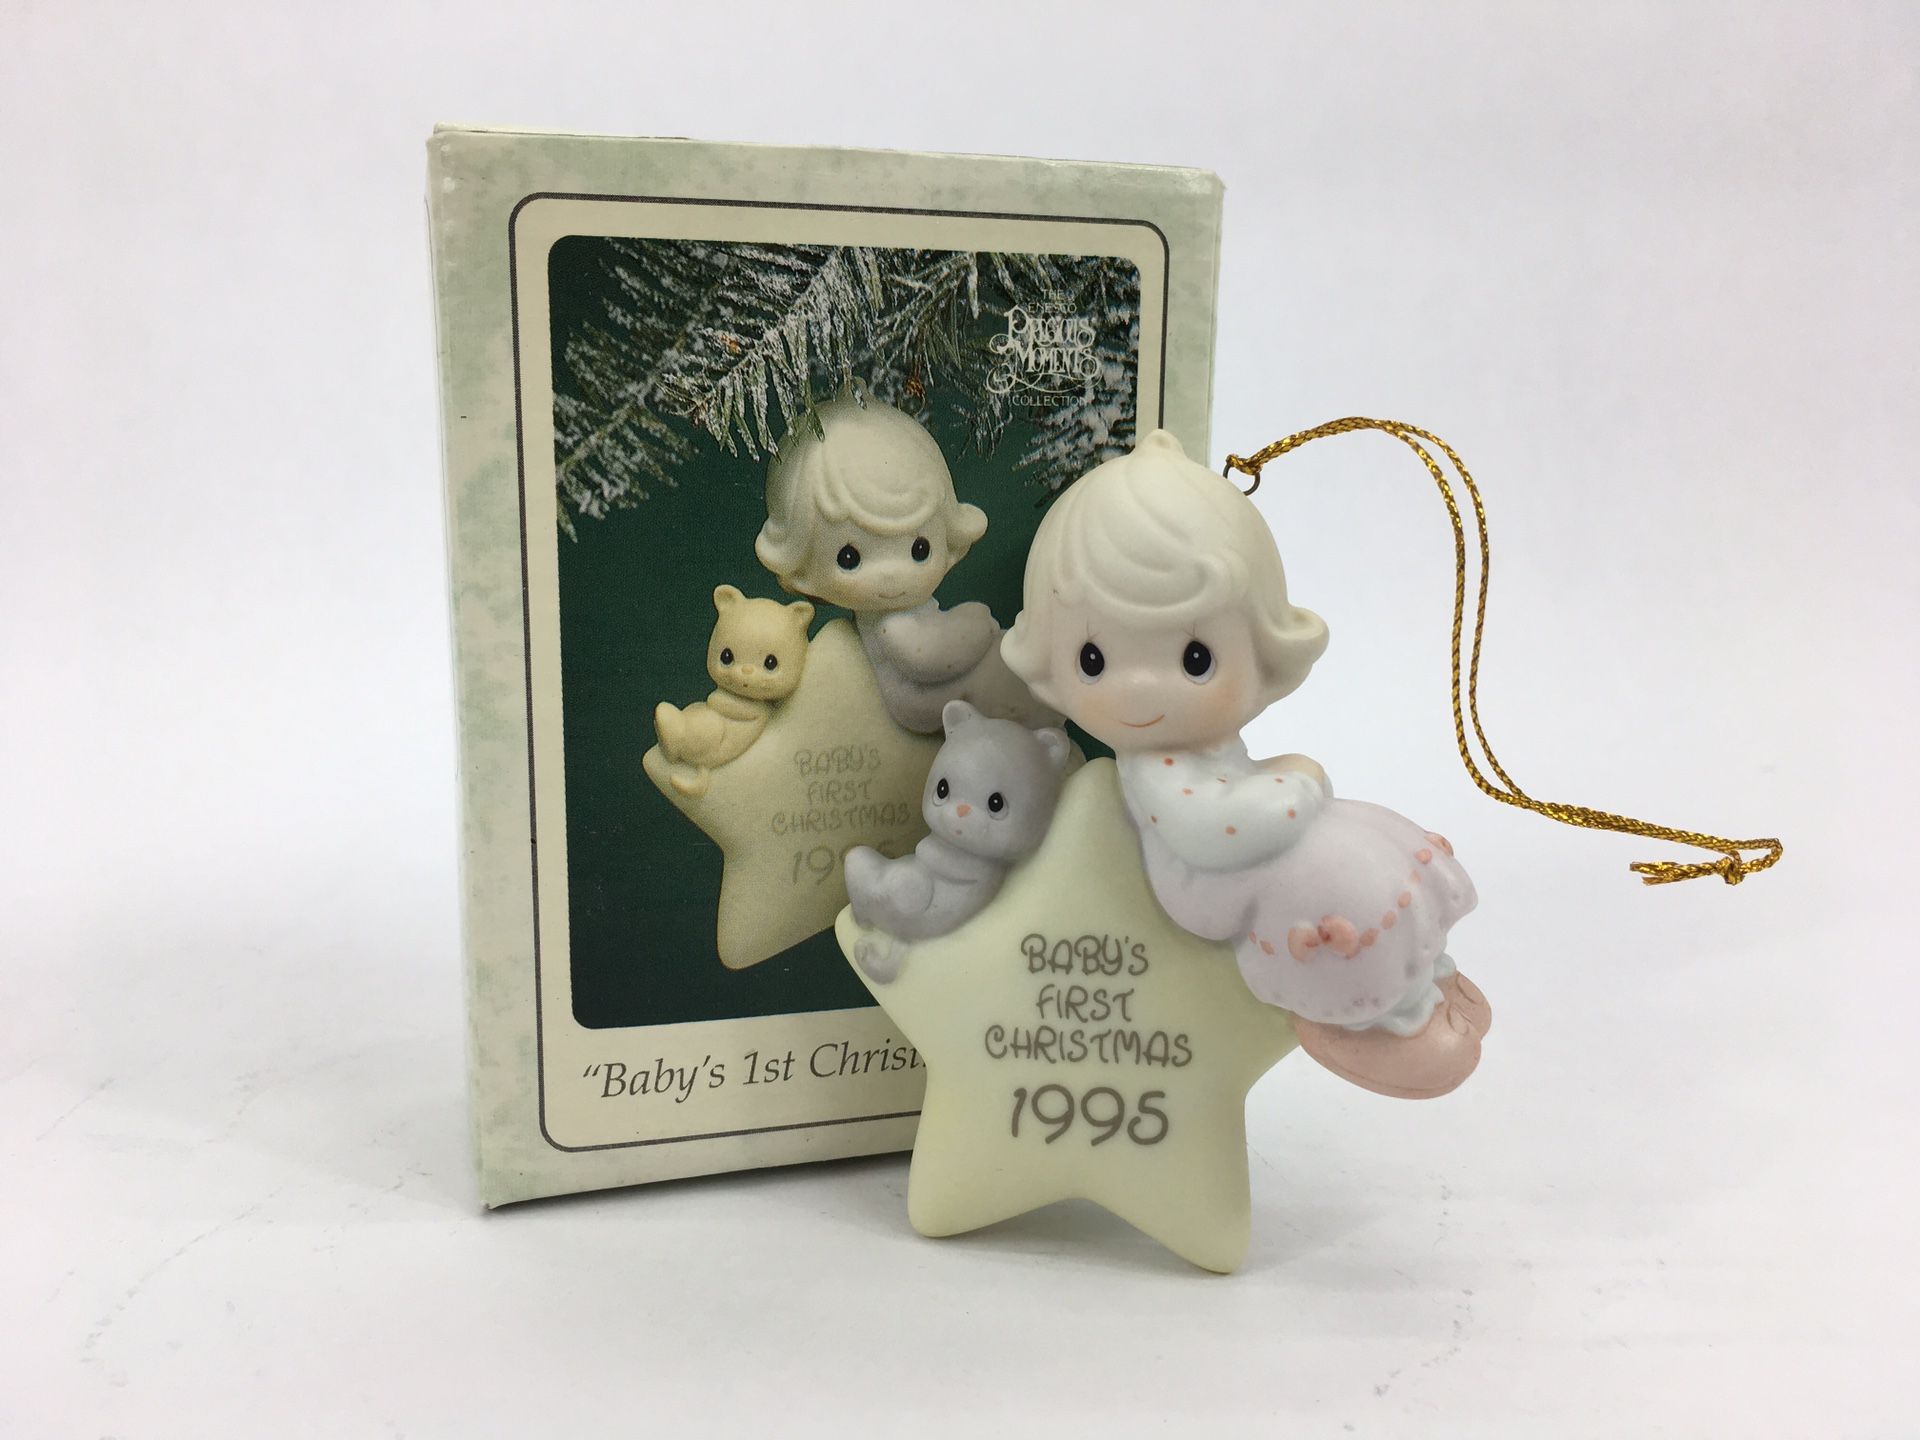 Enesco Precious Moments “Baby’s First Christmas” Ornament (1995)